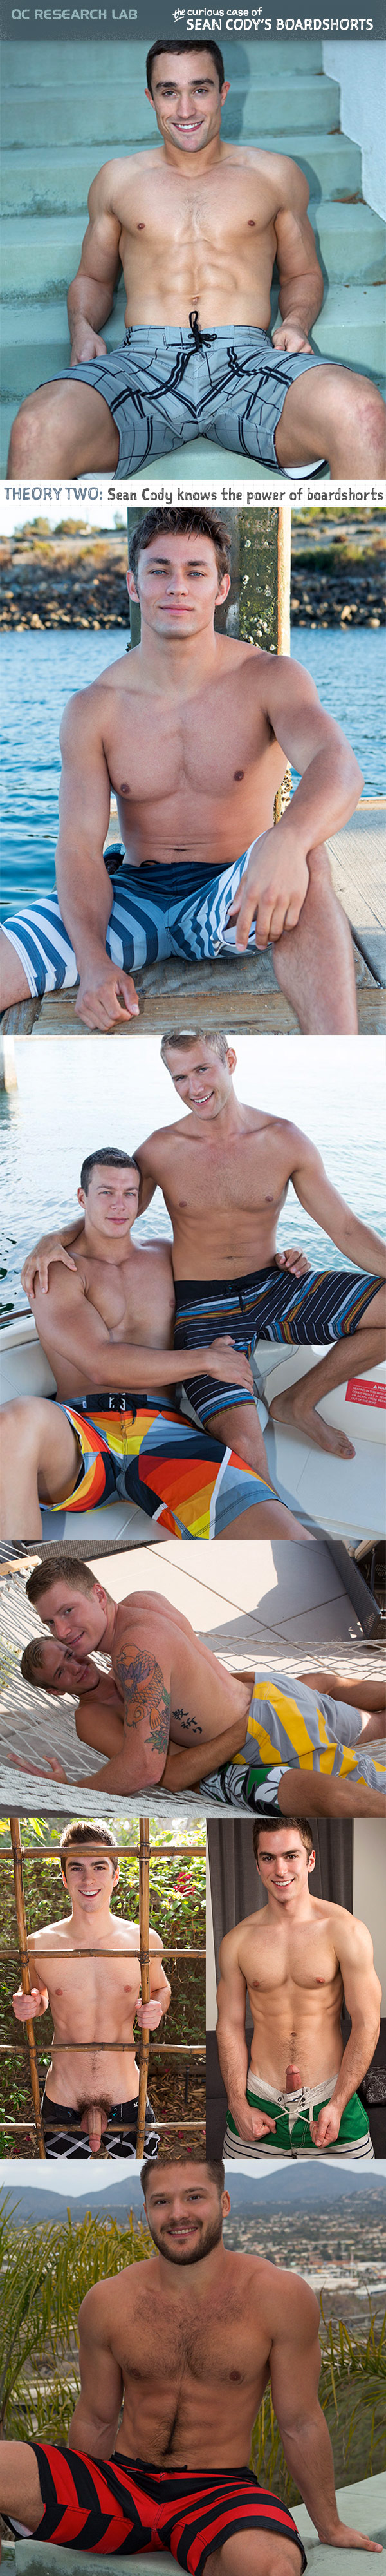 The Curious Case of Sean Cody's Boardshorts